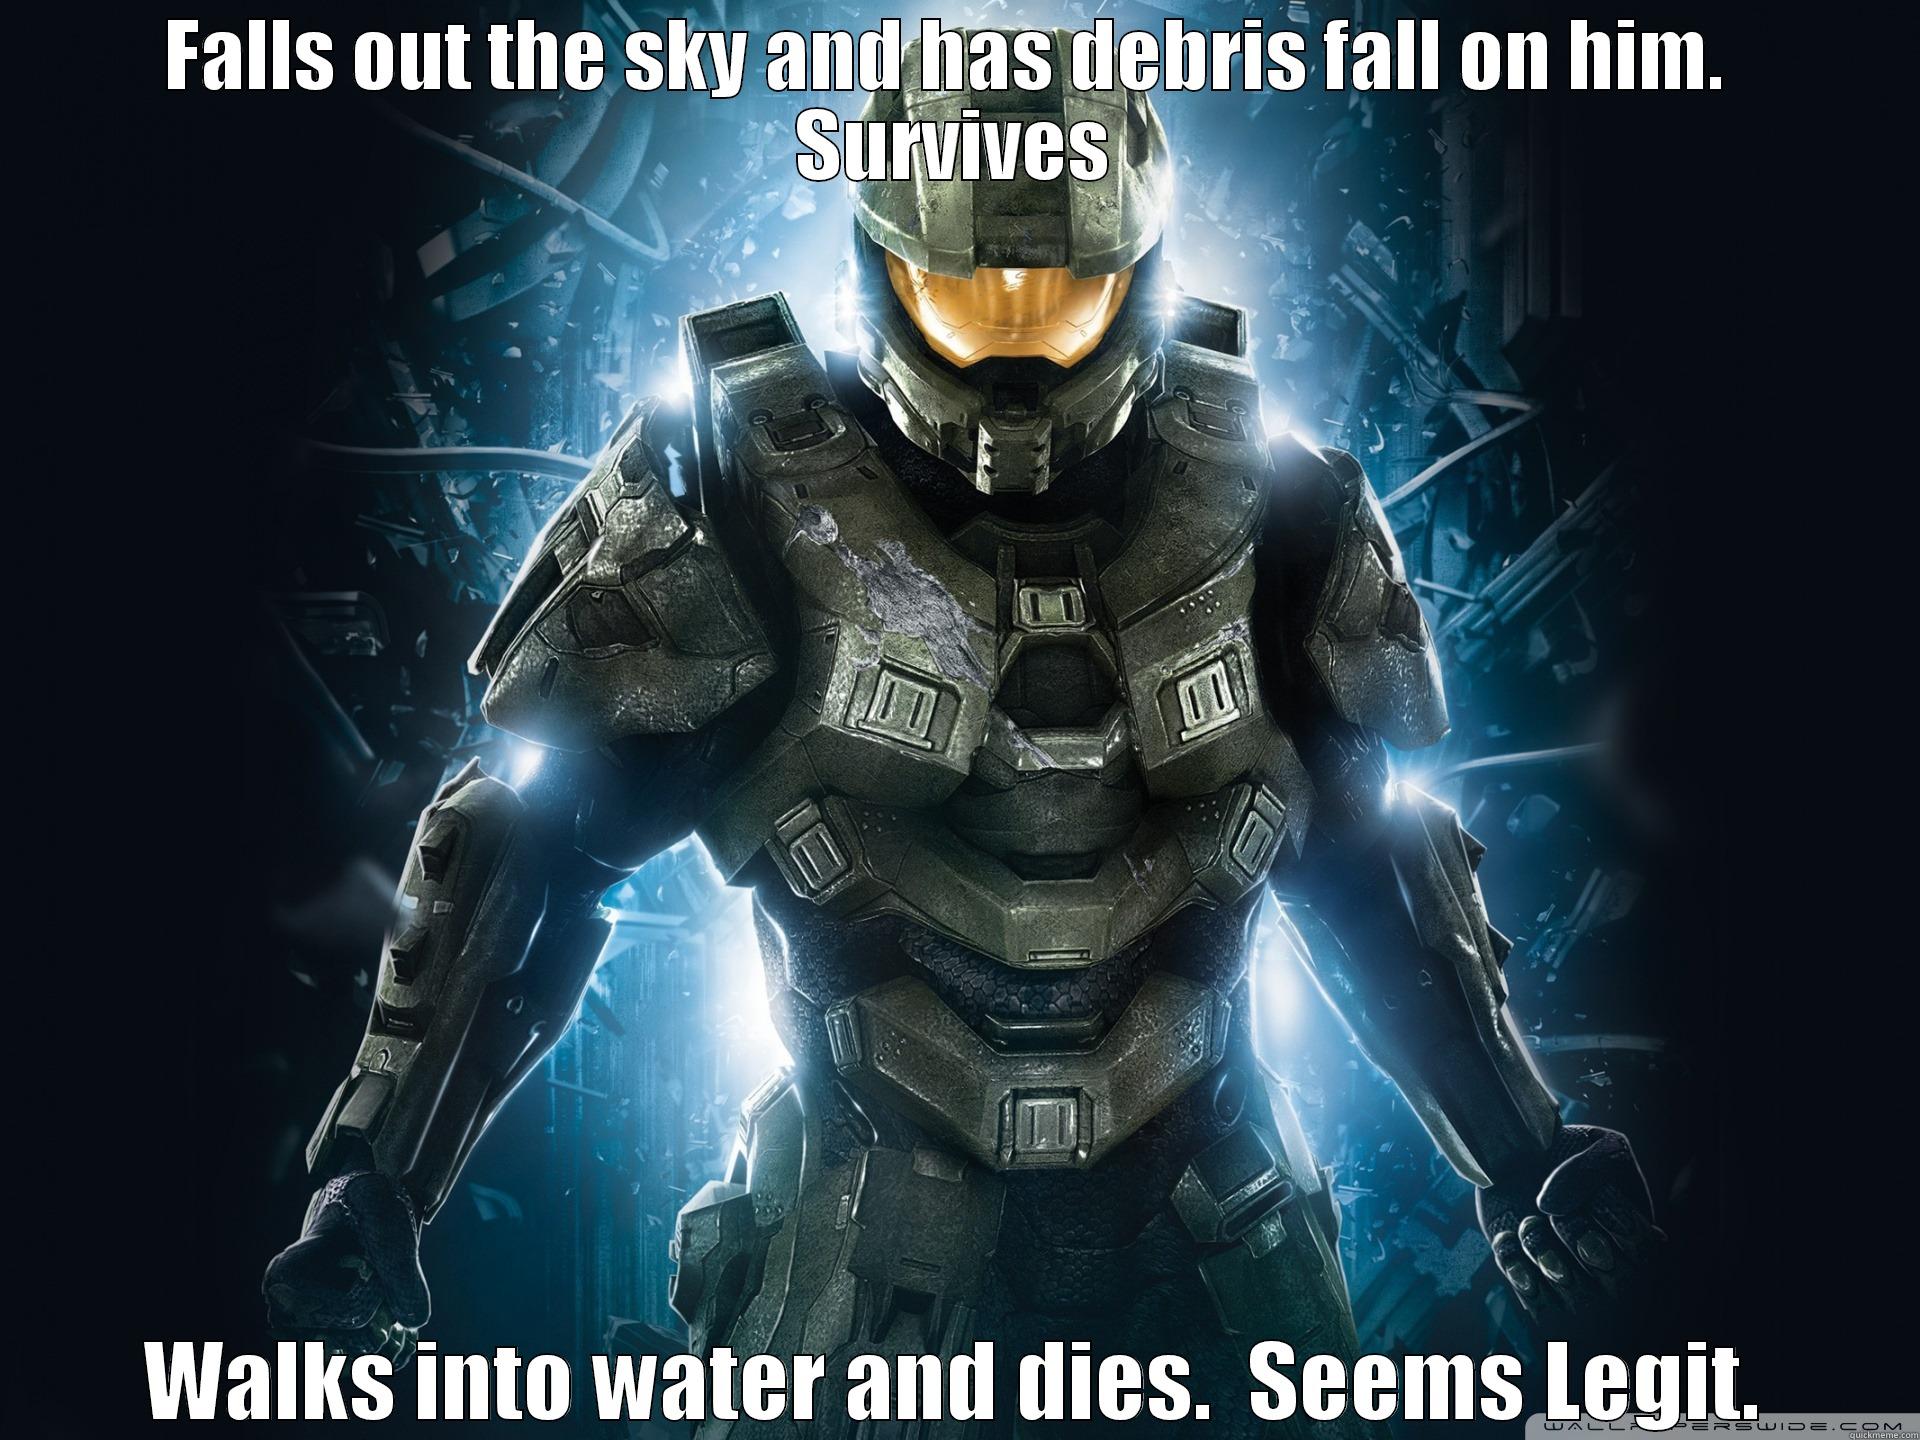 FALLS OUT THE SKY AND HAS DEBRIS FALL ON HIM.  SURVIVES WALKS INTO WATER AND DIES.  SEEMS LEGIT. Misc